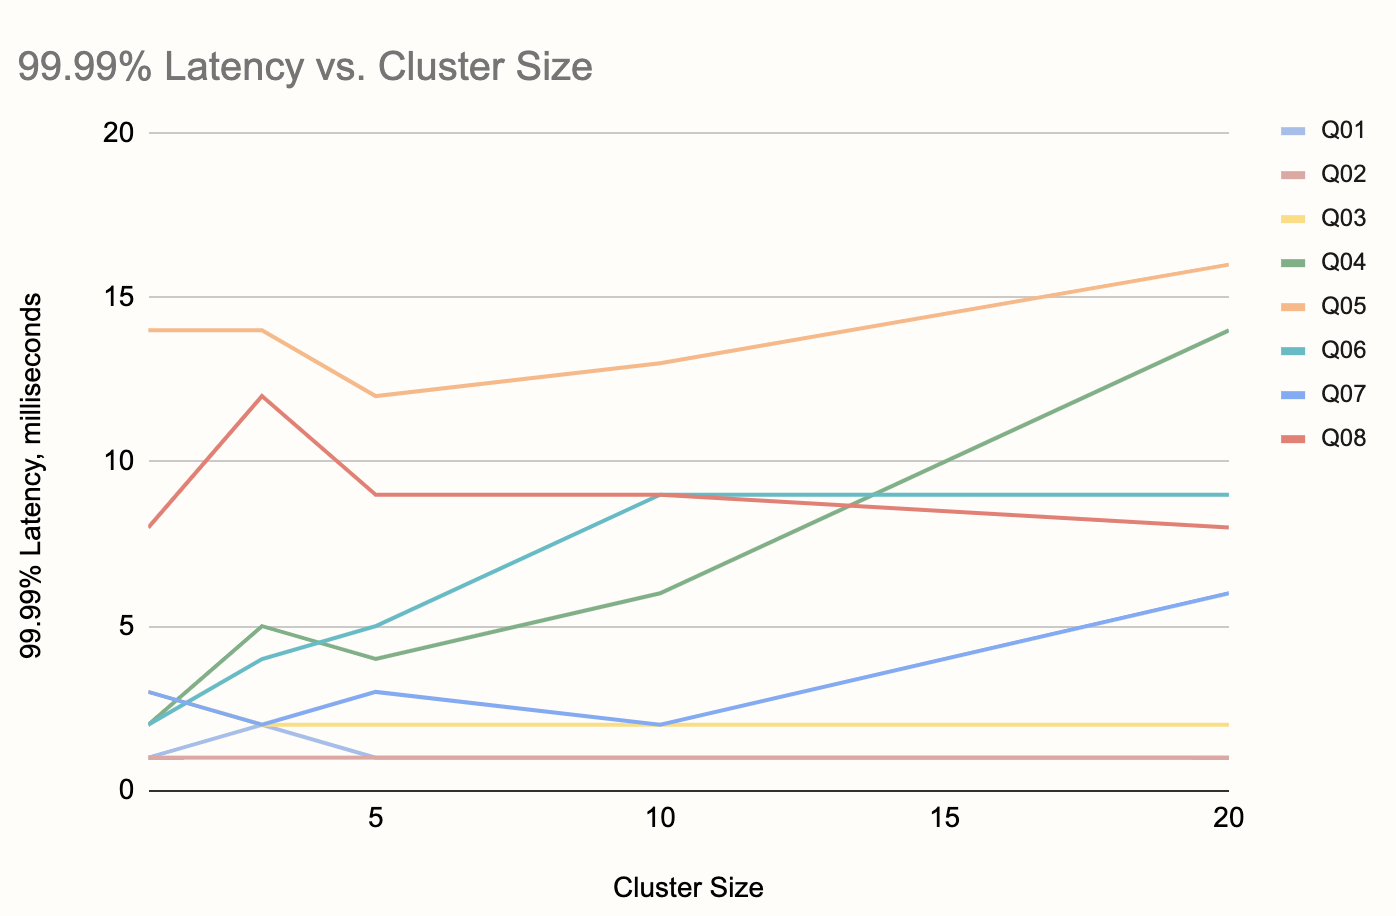 99.99% latency of NEXMark queries at 1M event/second vs. cluster size